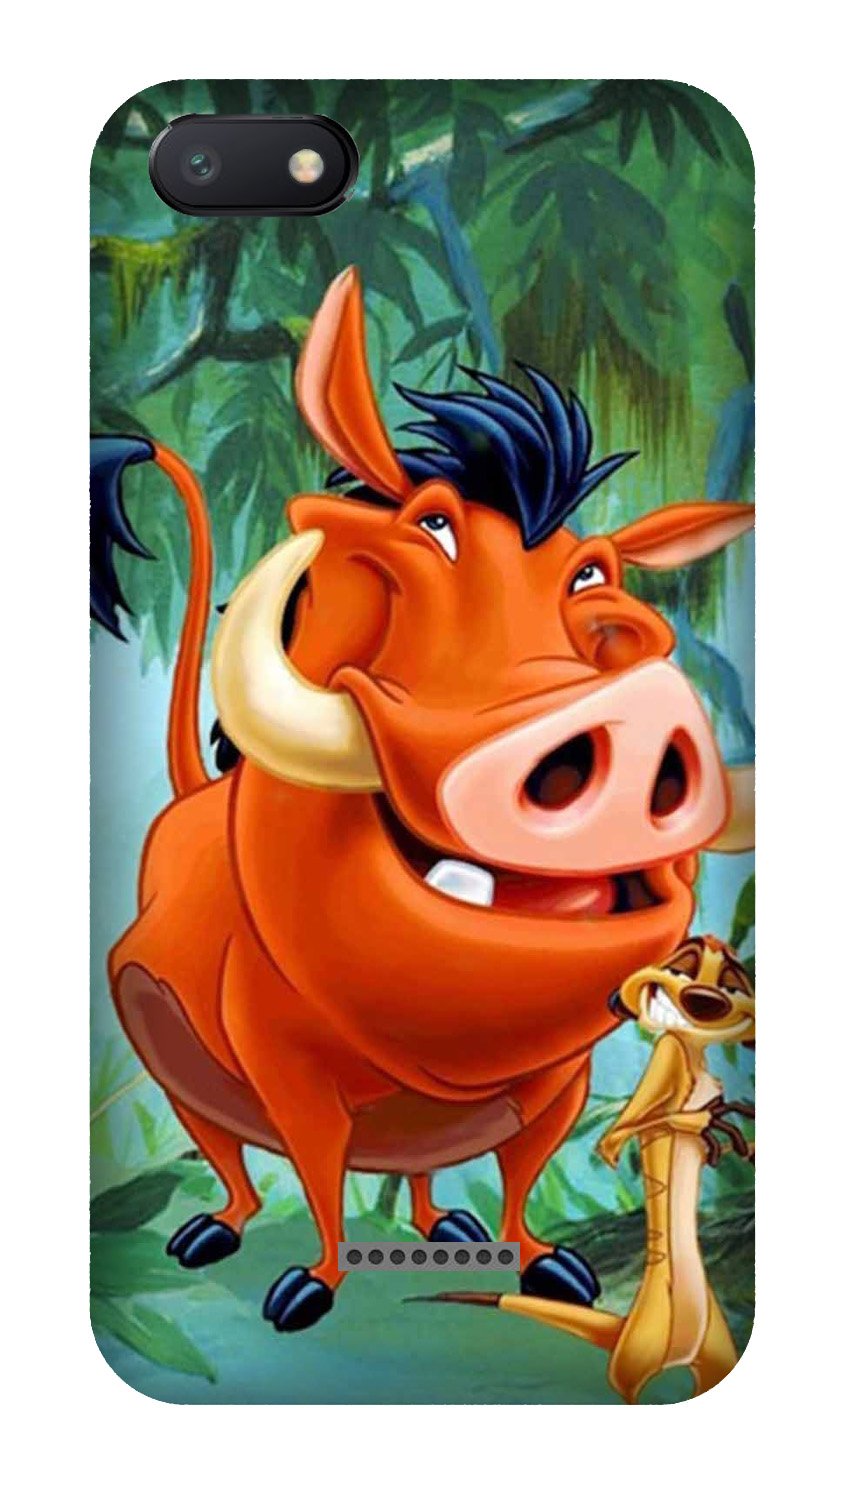 Timon and Pumbaa Mobile Back Case for Redmi 6A  (Design - 305)